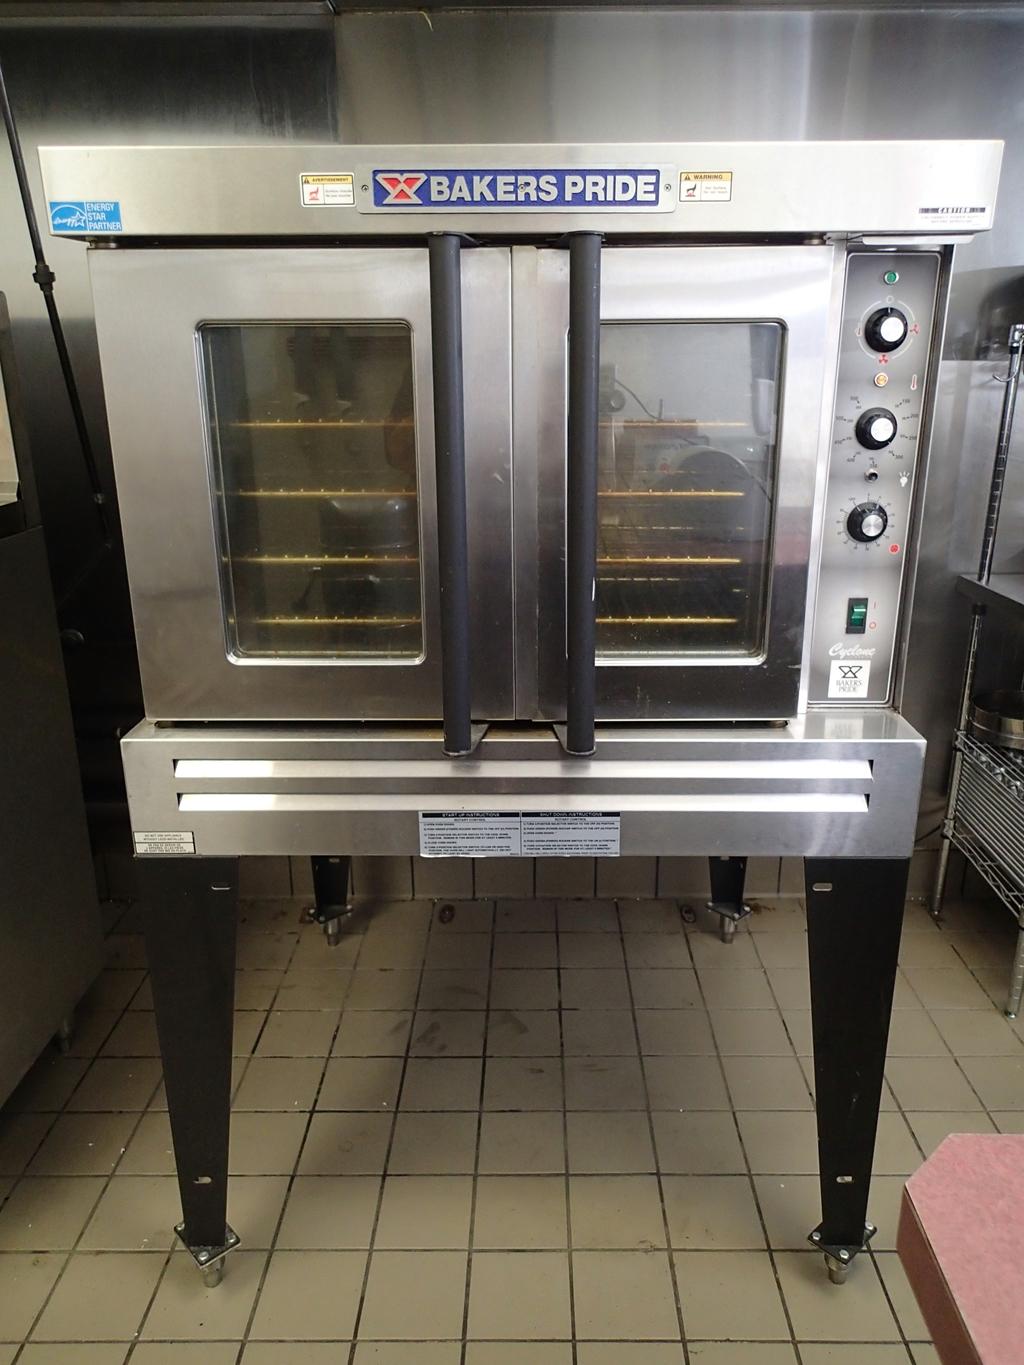 Bakers Pride BCO-G1 convection oven - s/n 555031607018